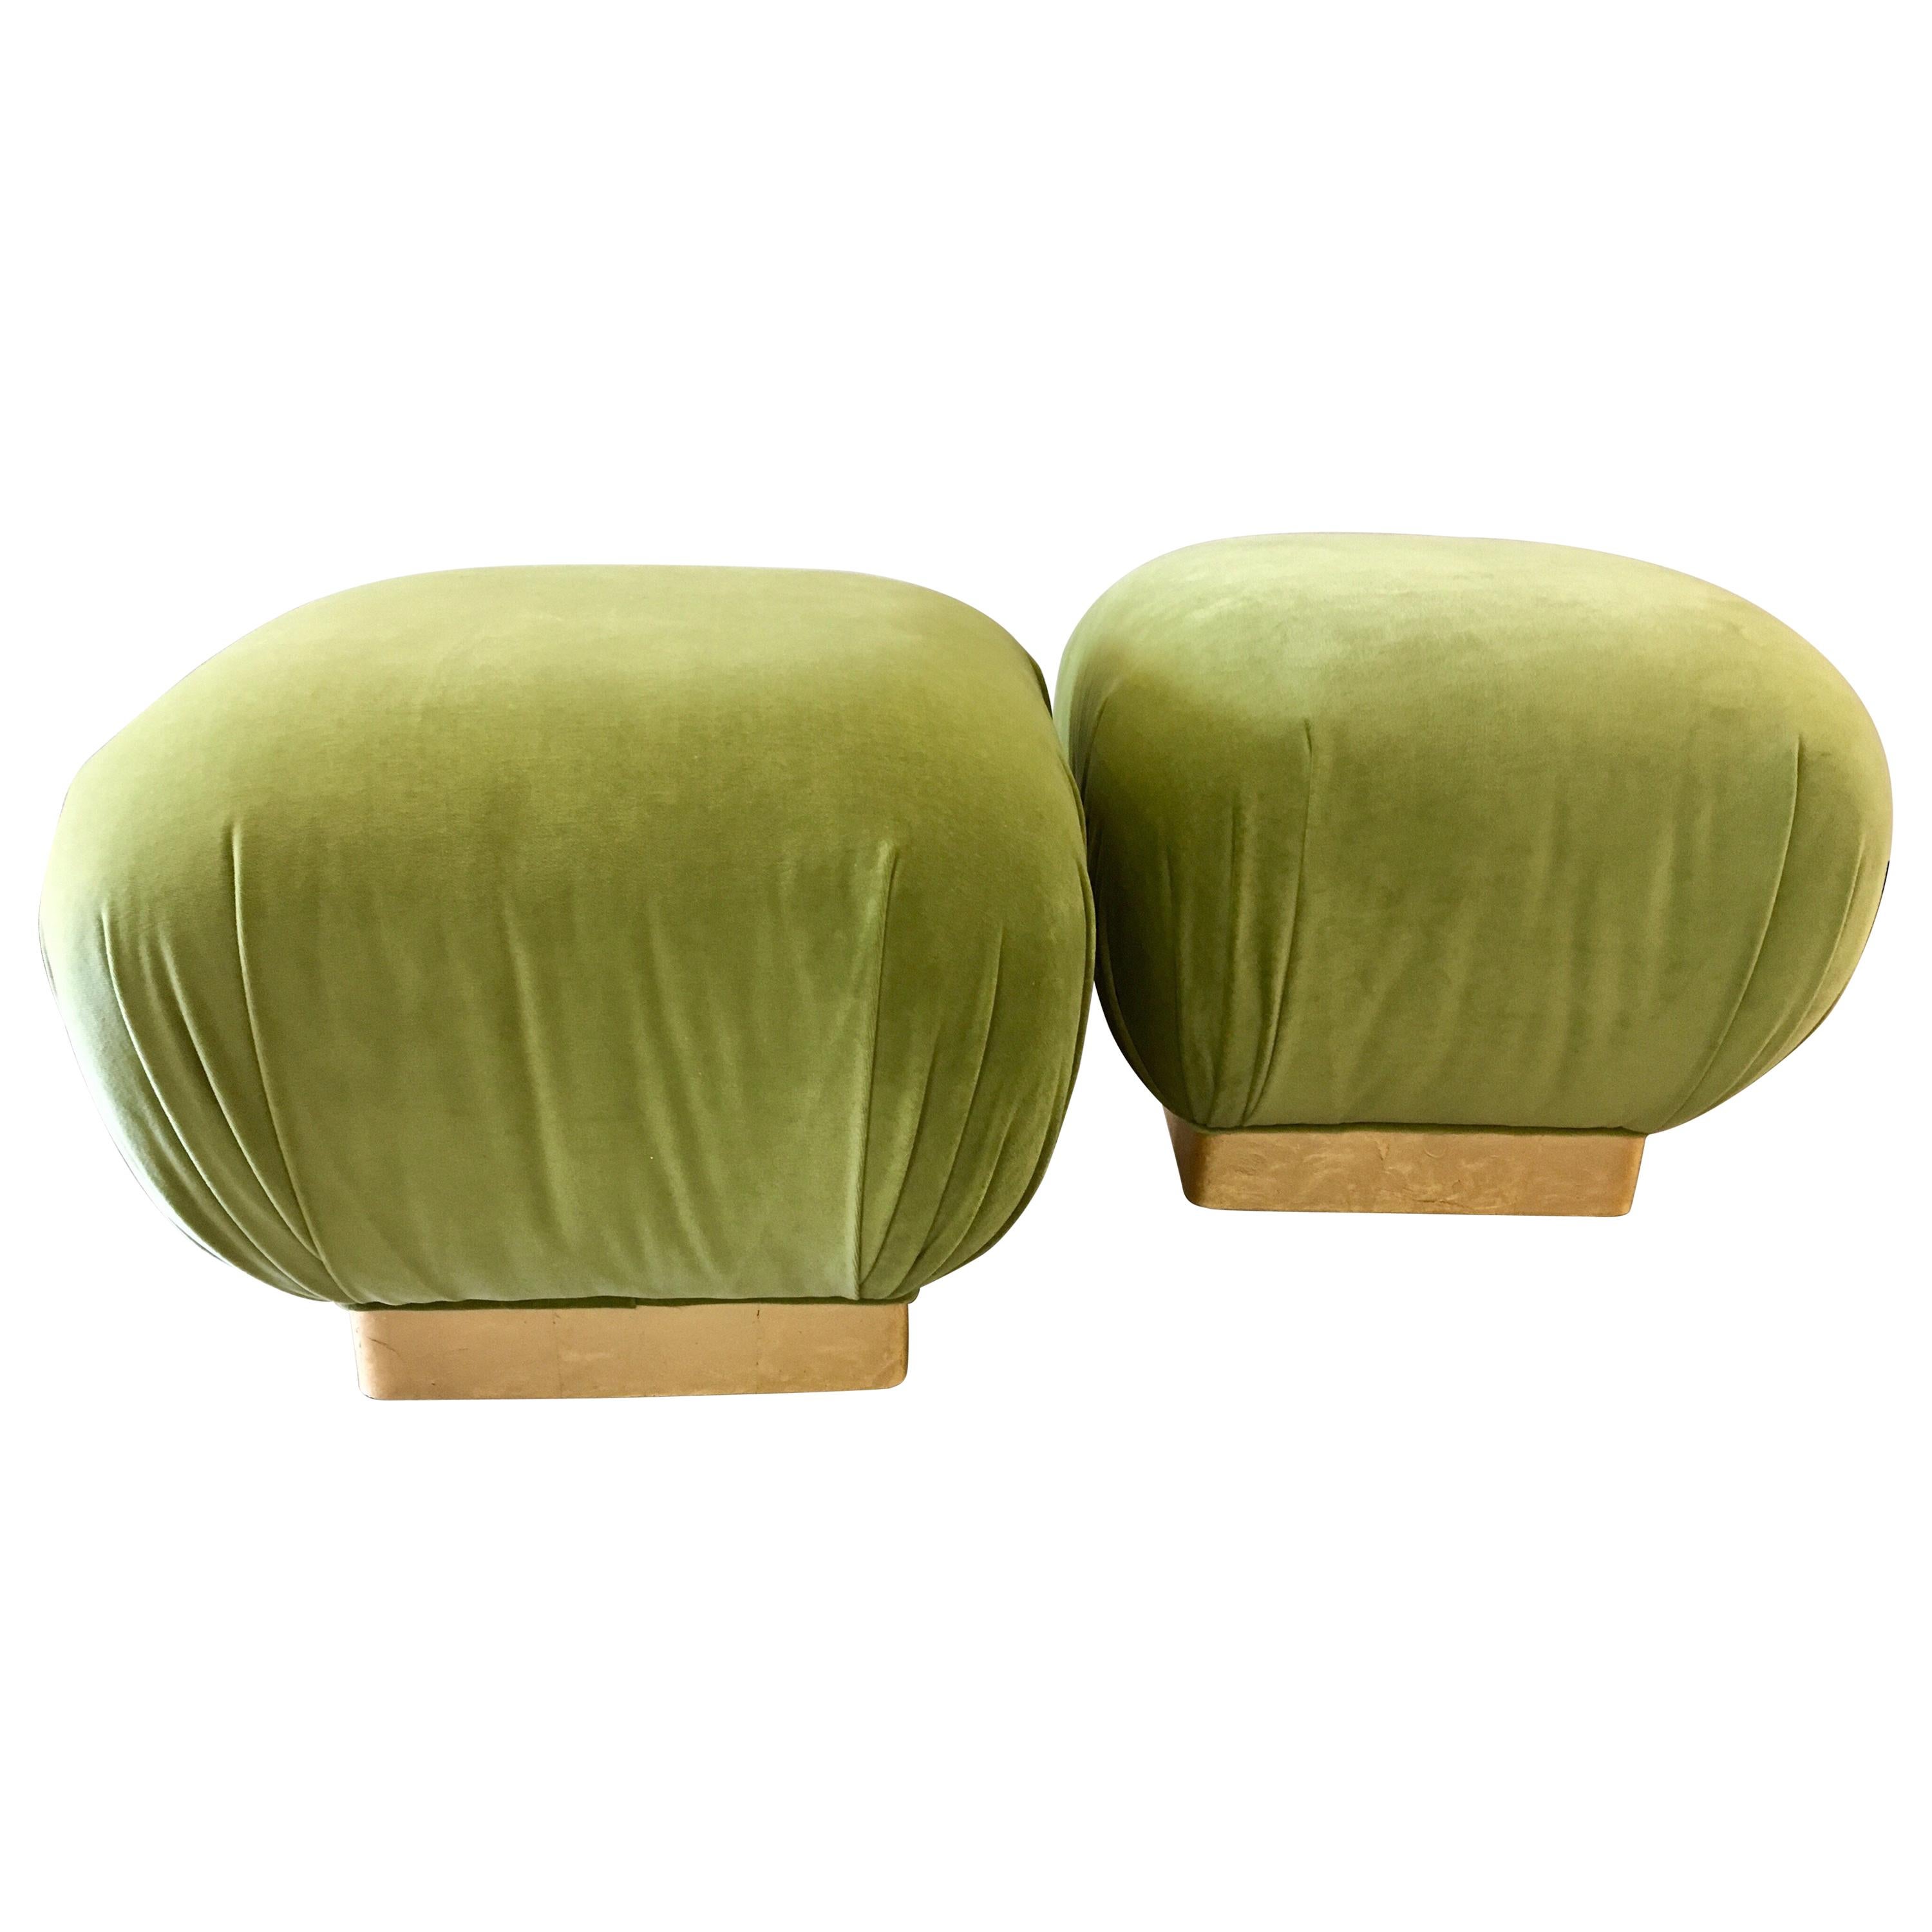 Pair of Matching Midcentury Poufs Stools Ottomans with Brass Band Base